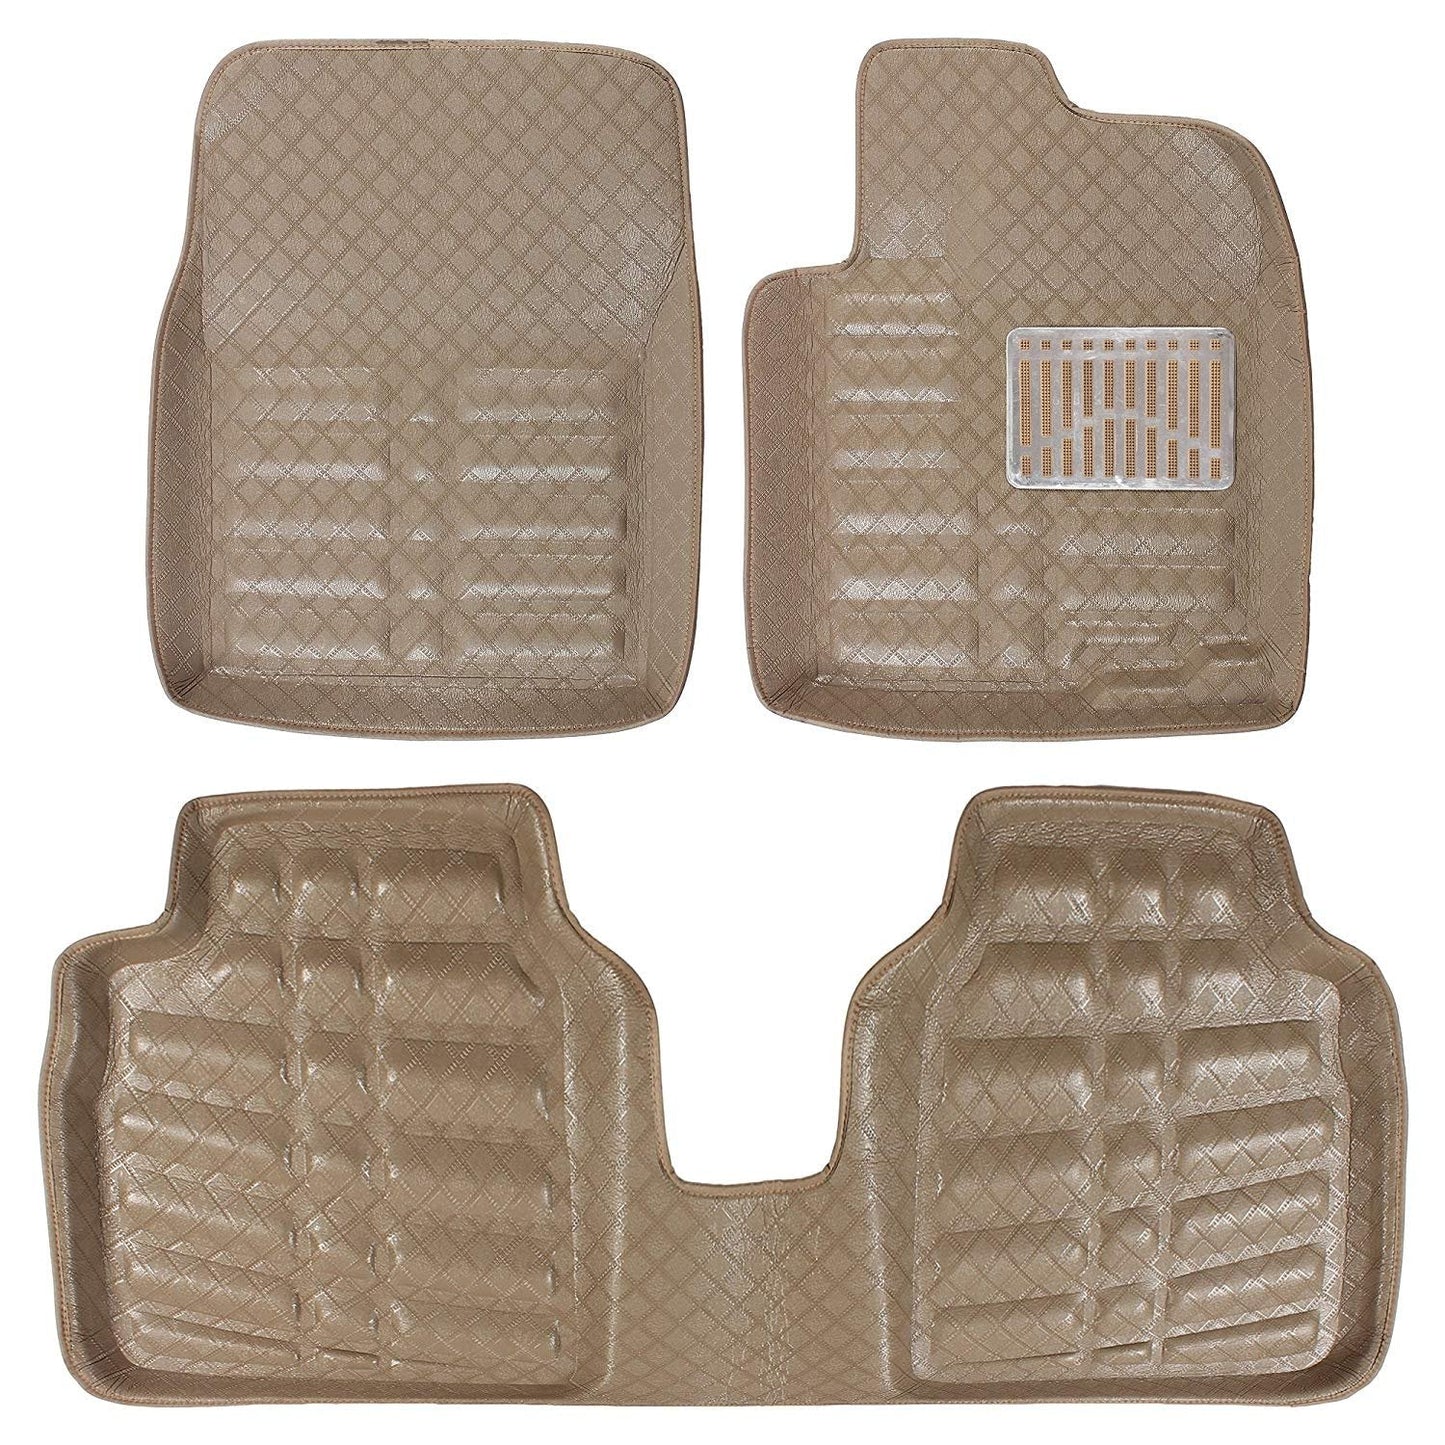 Oshotto 4D Artificial Leather Car Floor Mats For Nissan Terrano - Set of 3 (2 pcs Front & one Long Single Rear pc) - Beige